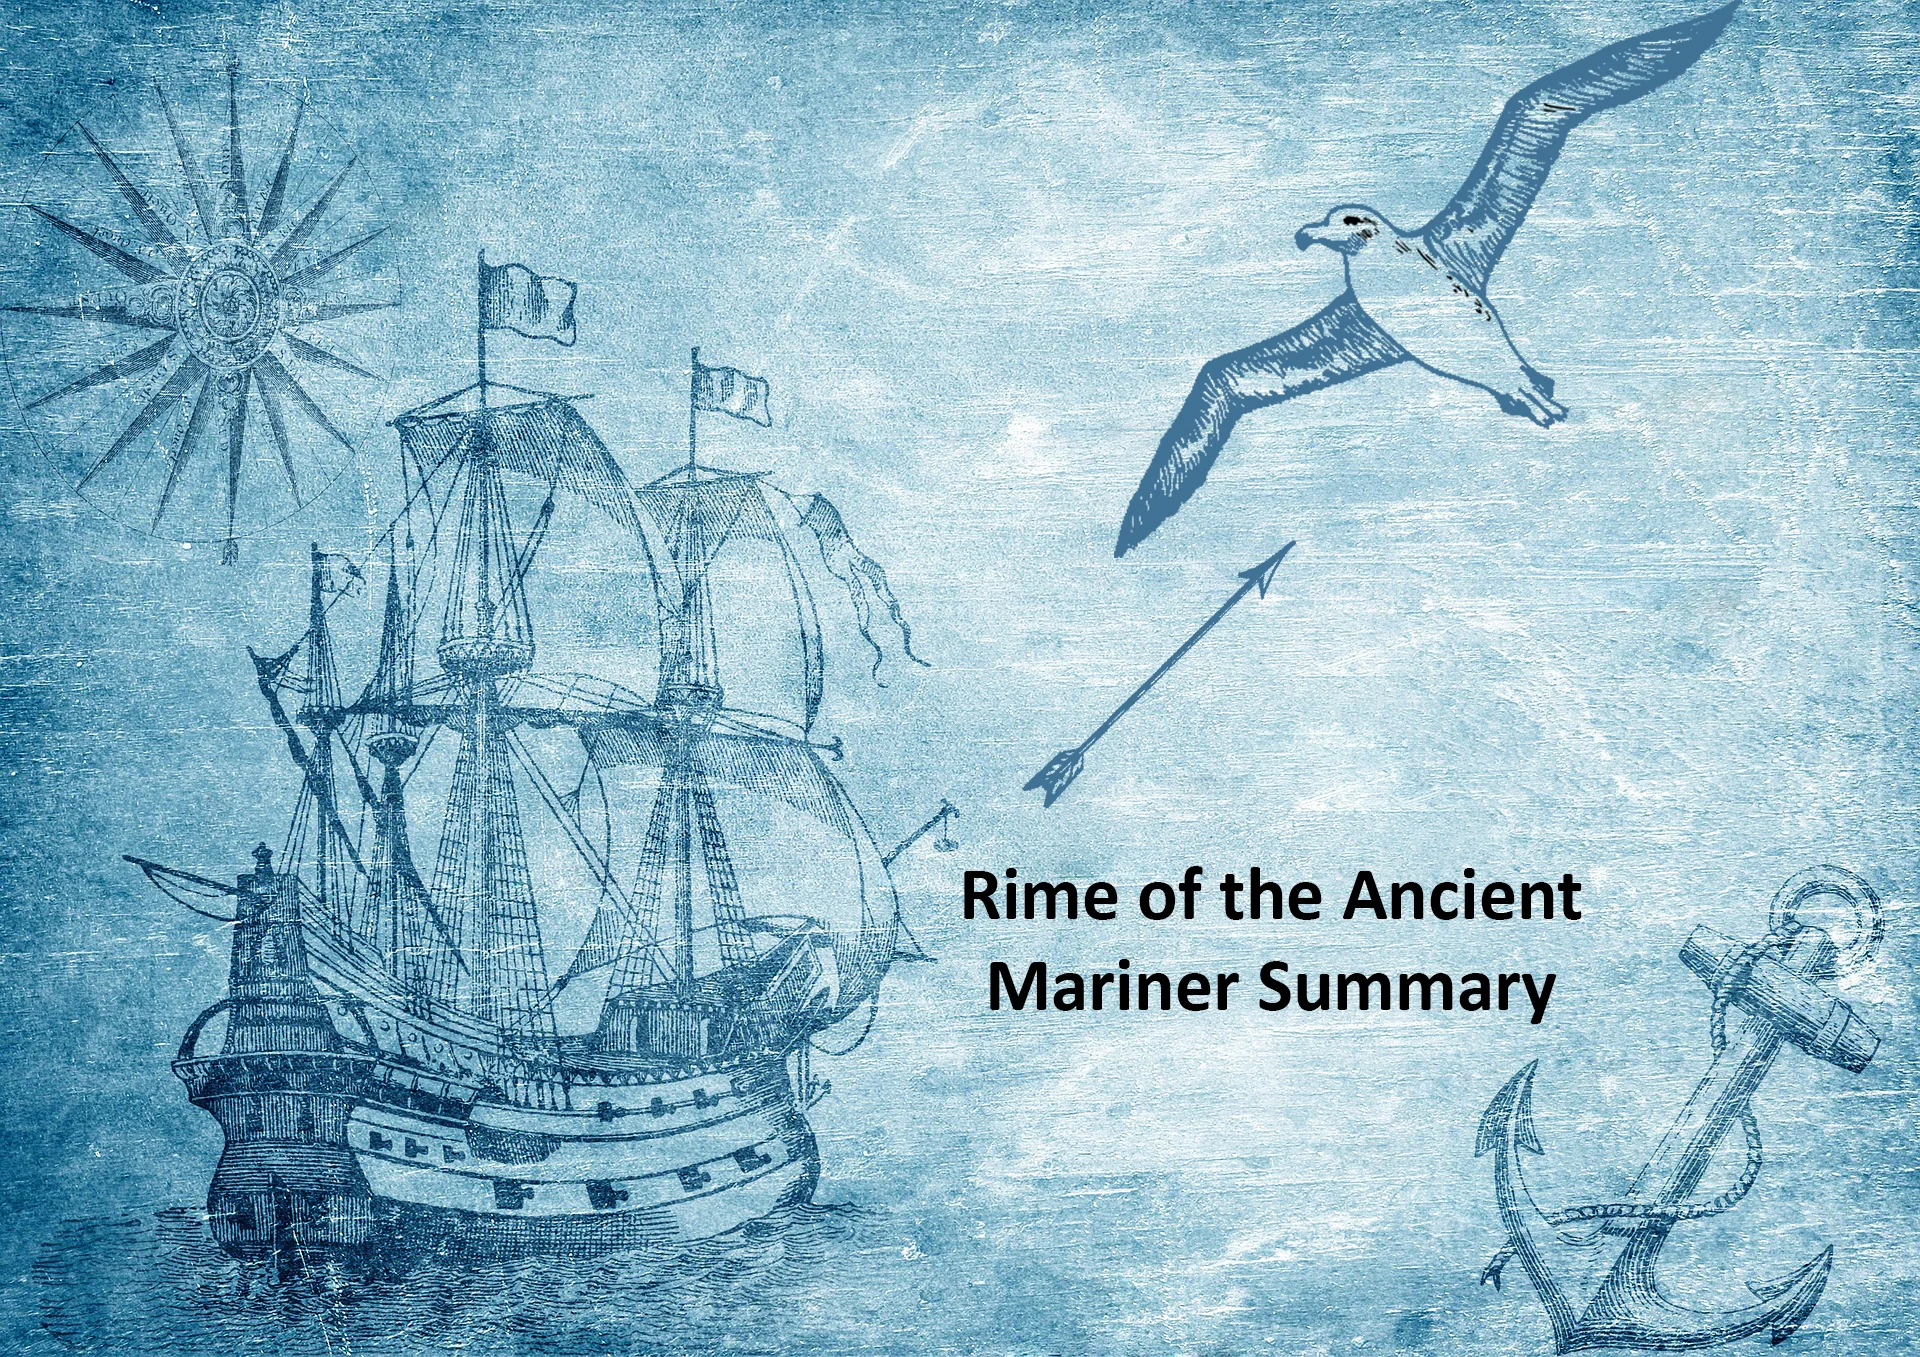 The Rime of the Ancient Mariner Summary